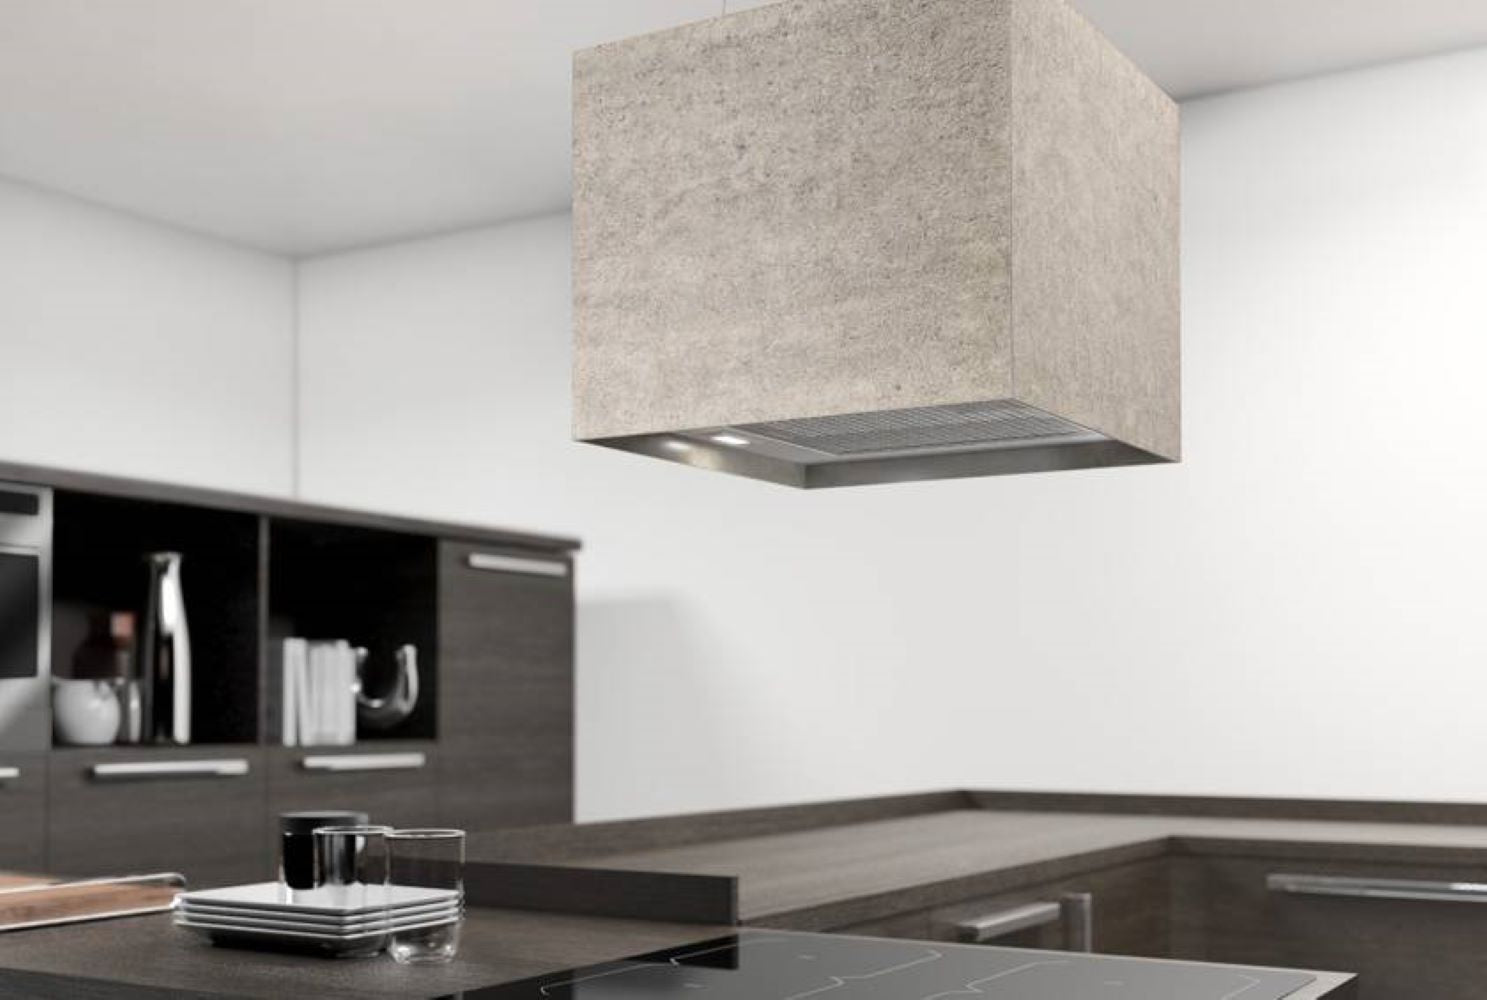 Airforce Concrete 40cm Island Lamp Cooker Hood with Integra System - Ivory